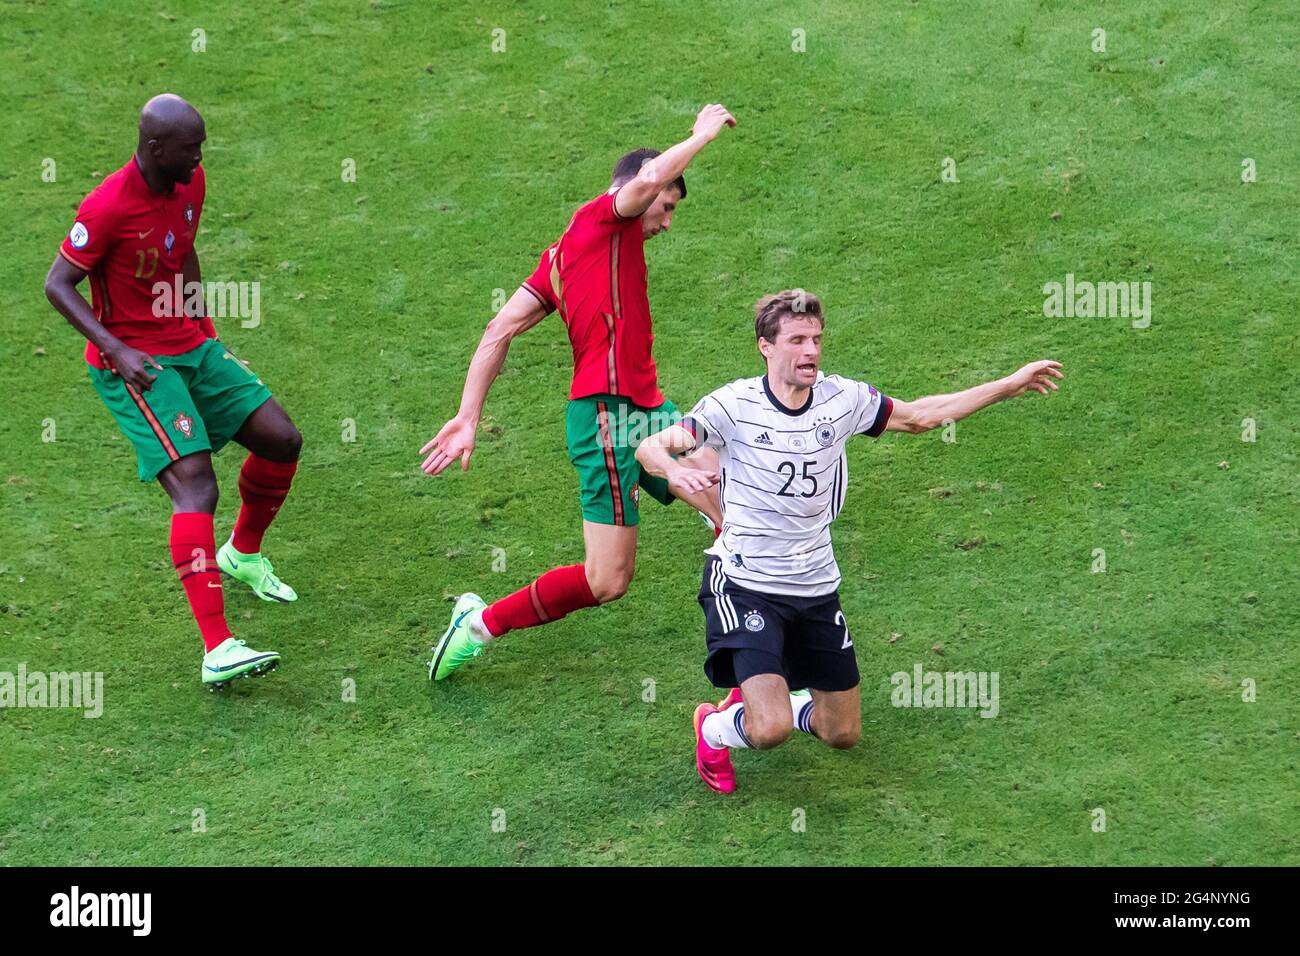 Munich, Germany. 19th June, 2021. William Carvalho, Ruben Dias of Portugal and Thomas Muller of Germany are seen in action during the UEFA EURO 2020 Championship Group F match between Portugal and Germany at Football Arena Munich. (Final score; Portugal 2:4 Germany) Credit: SOPA Images Limited/Alamy Live News Stock Photo